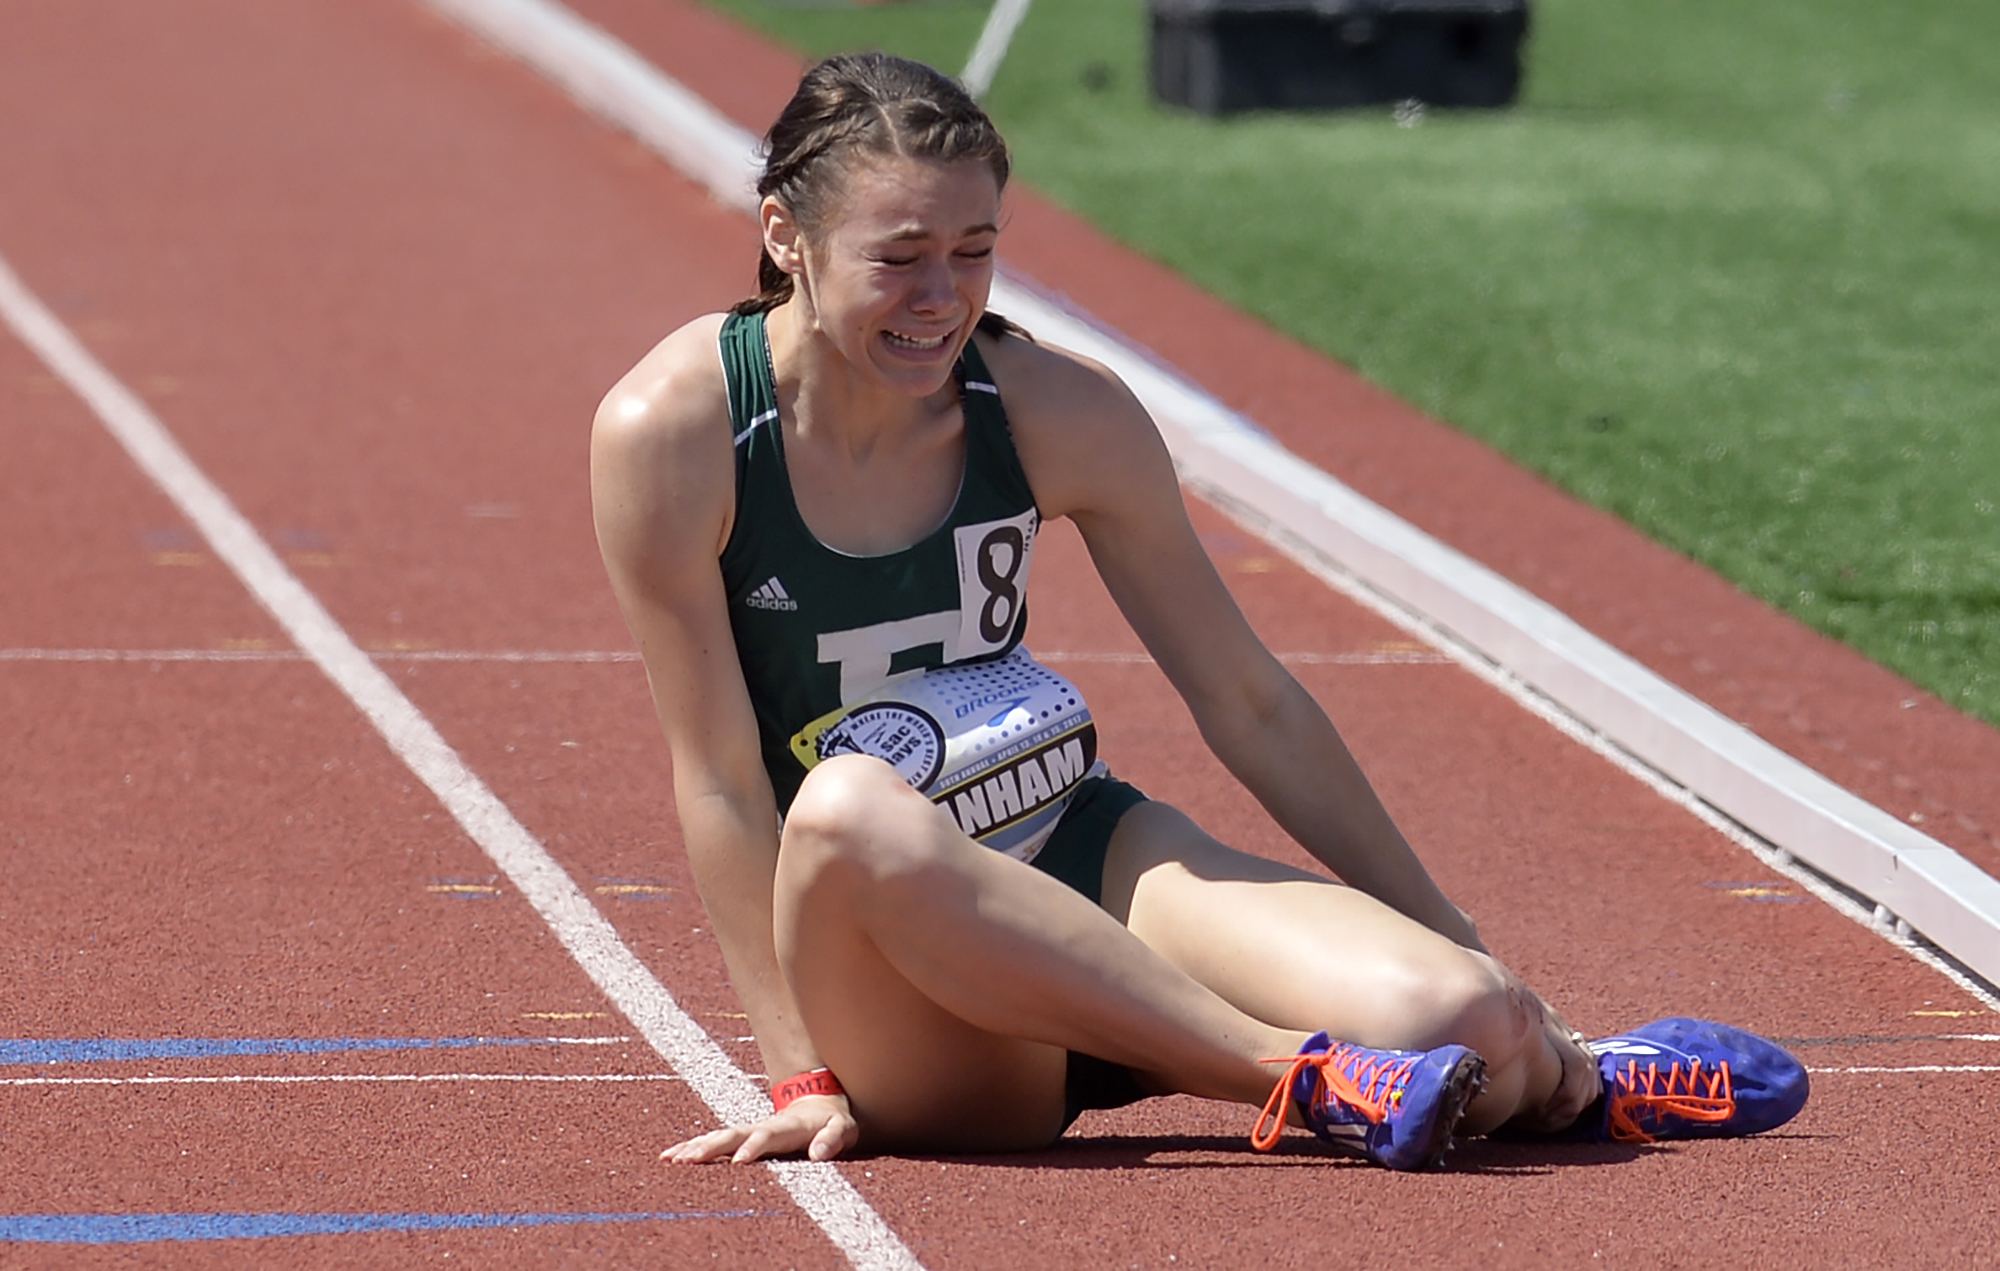  Rebekah Branham, of Eastern Michigan, lies on the track holding her injured ankle after stumbling in the 800m College Open Section 3  event at the Mt. SAC Relays at are El Camino College in Torrance Friday, April 14, 2017. 